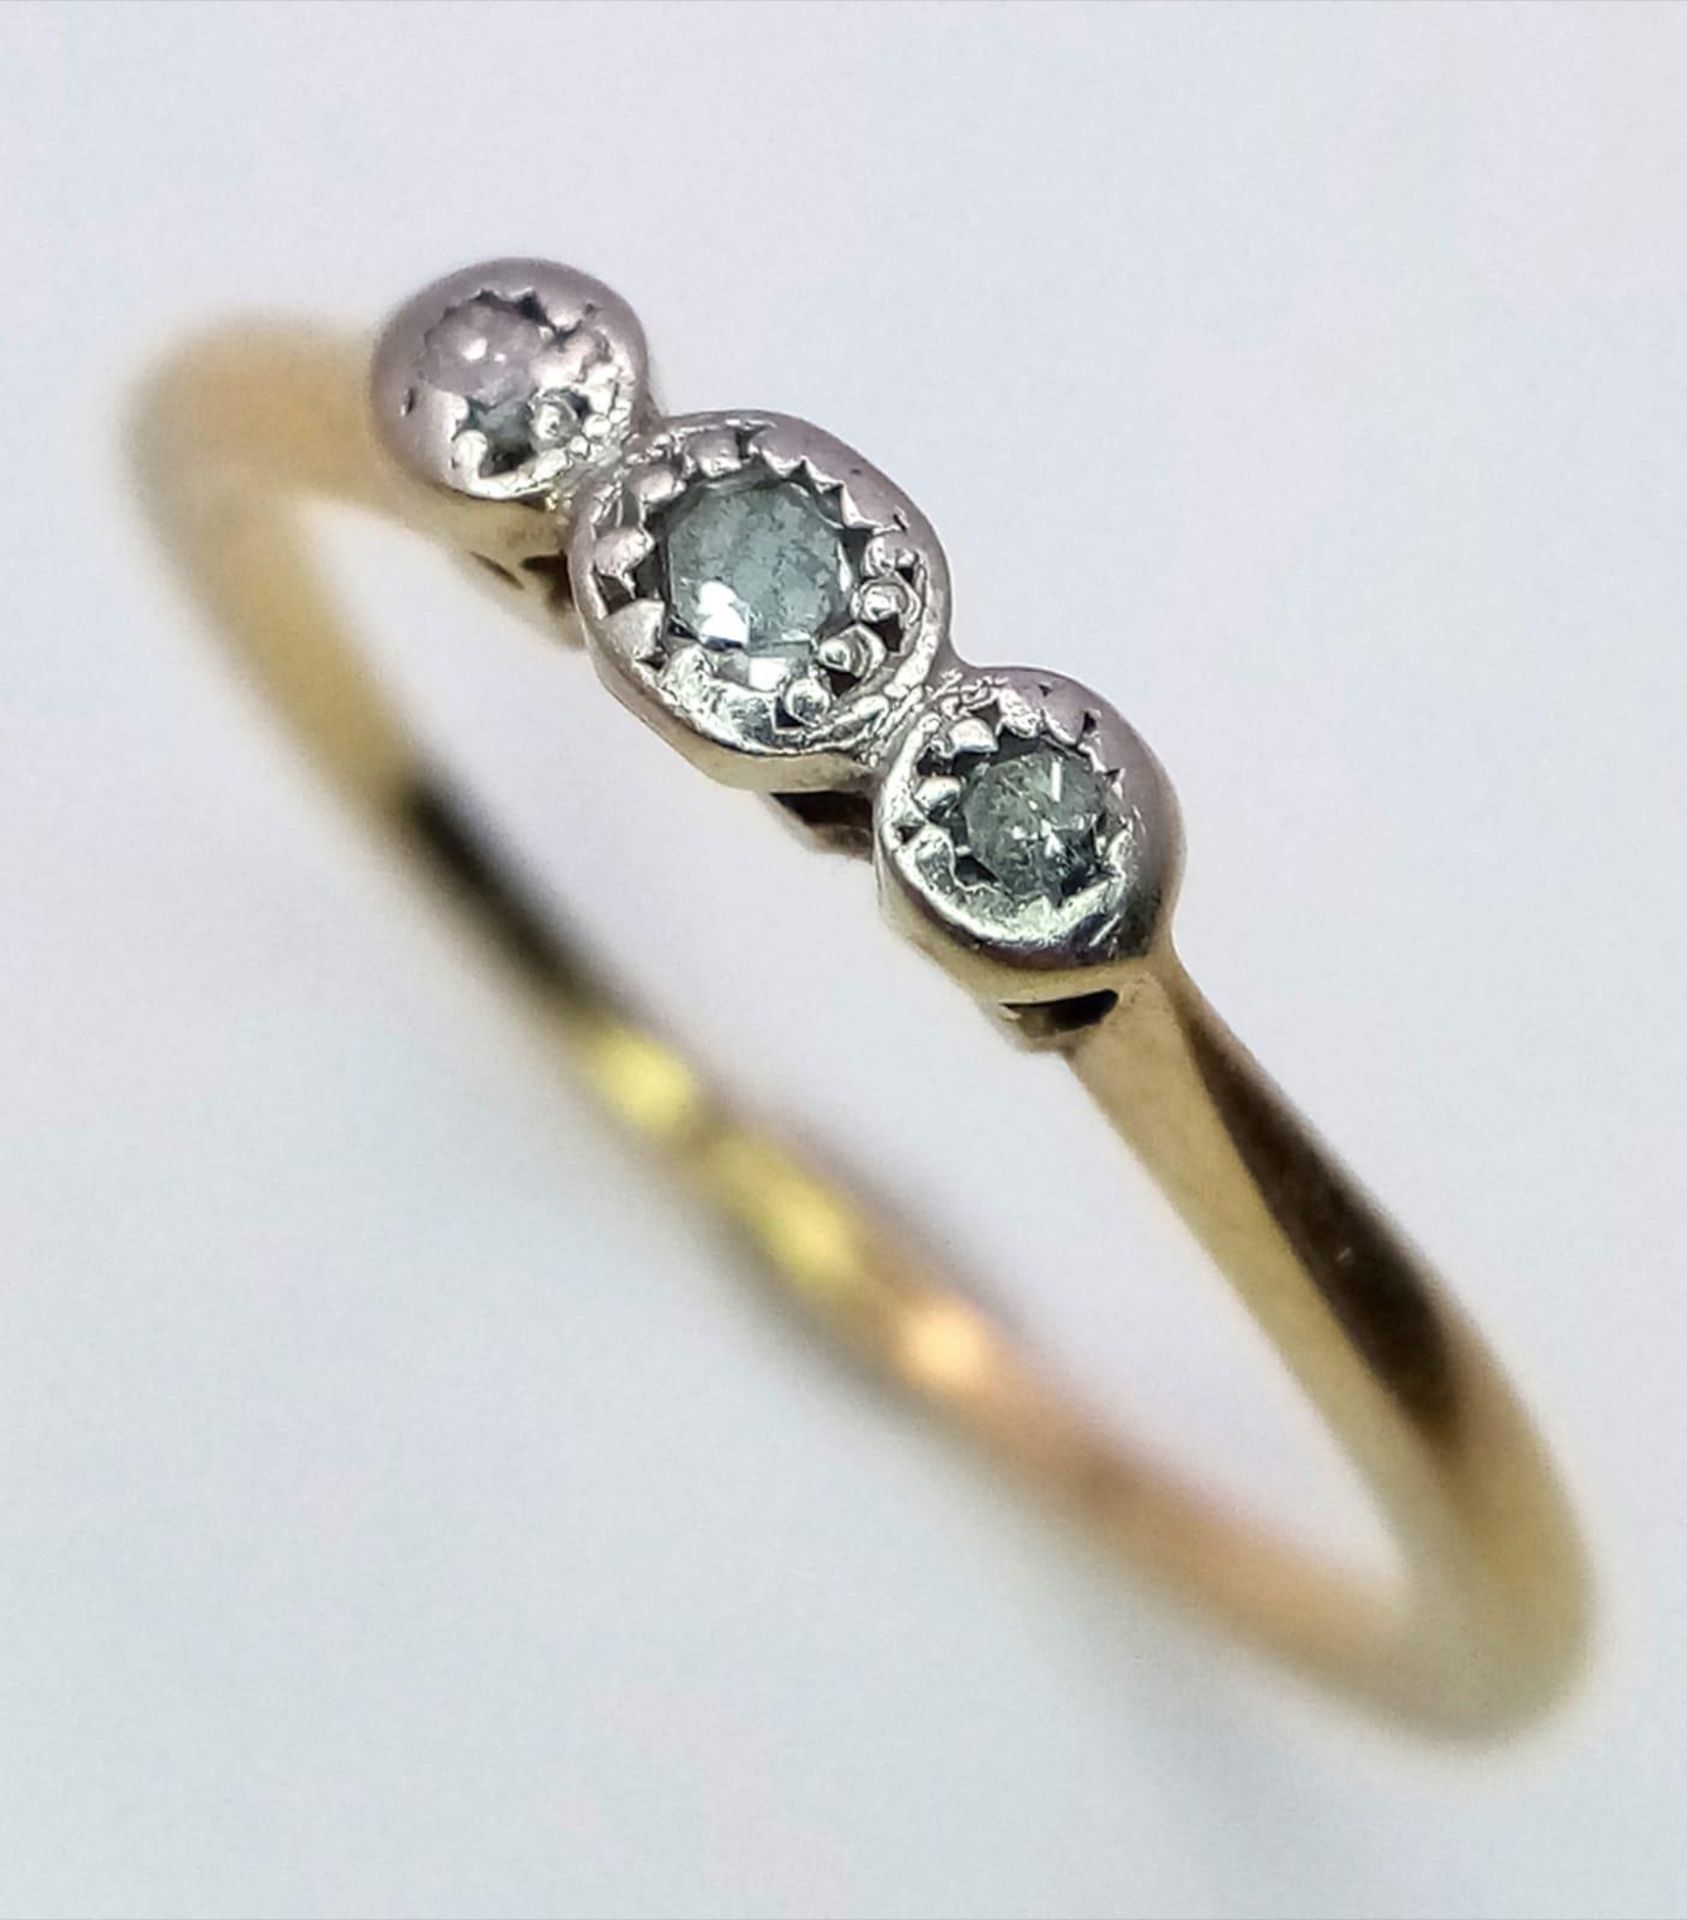 A VINTAGE 18K YELLOW GOLD & PLATINUM SET WITH 3 STONE DIAMOND RING, WEIGHT 1.6G SIZE K, REF SC 4090 - Image 4 of 10